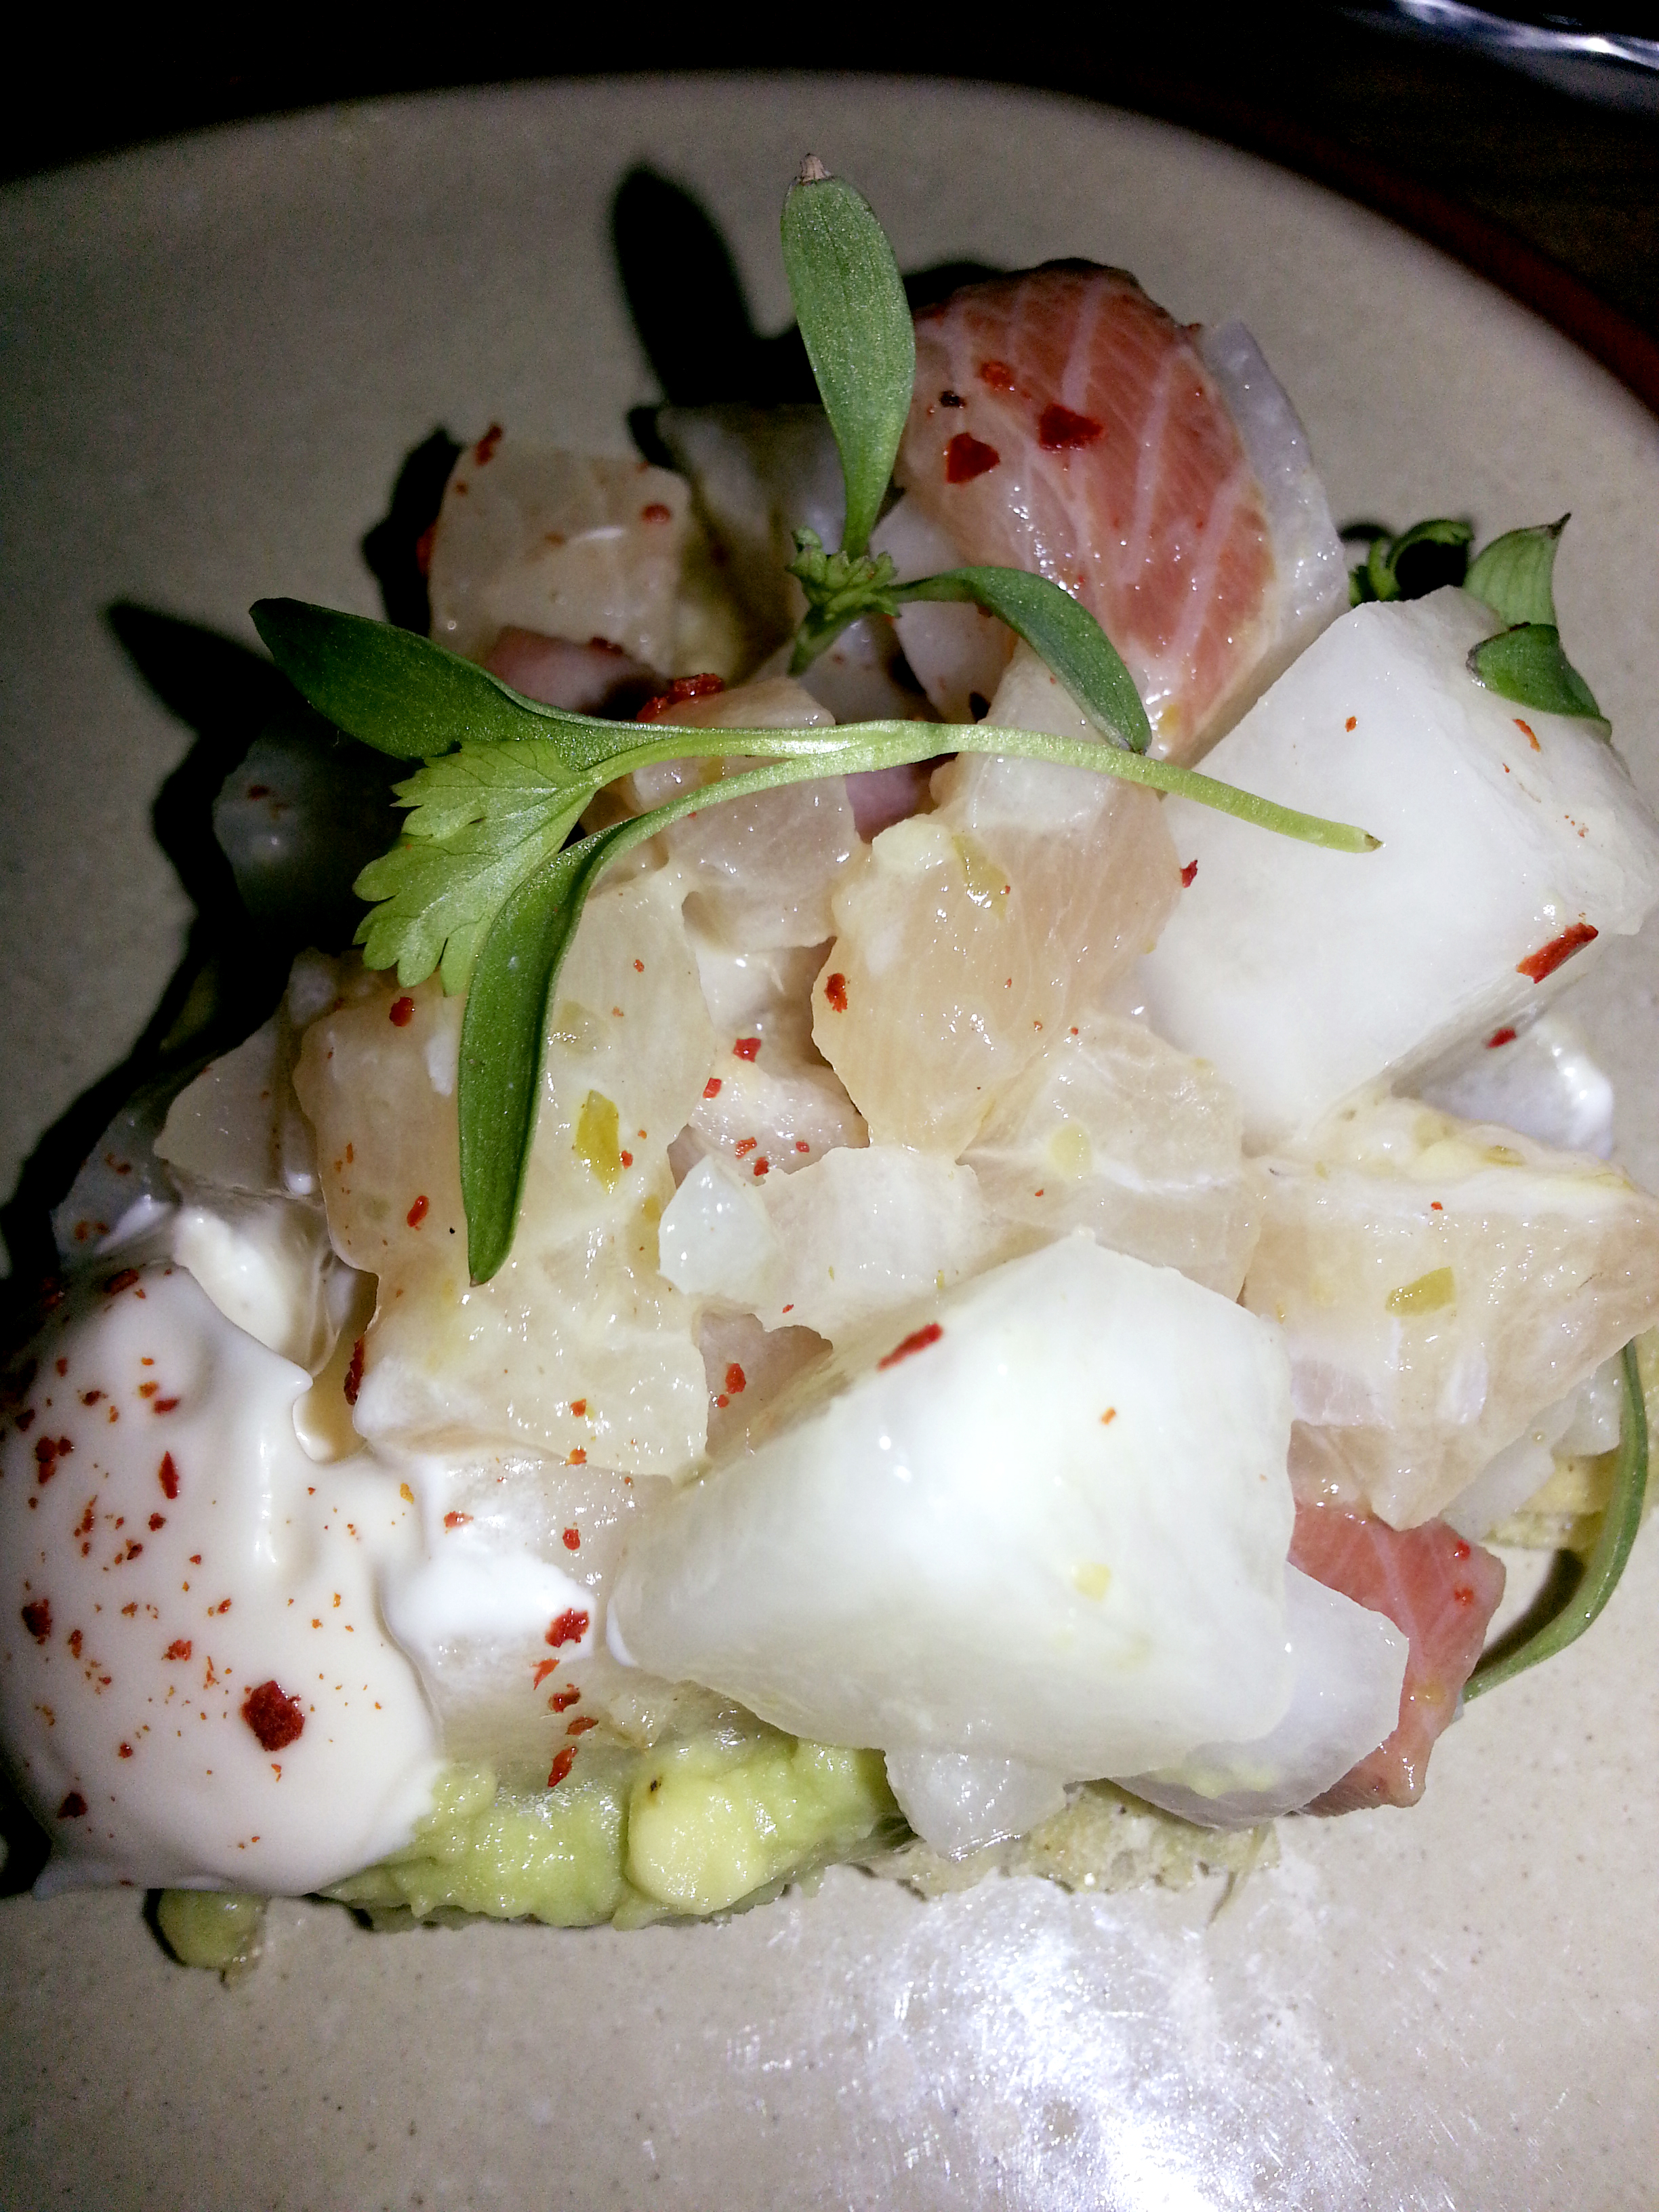 I’m generally distrustful of ceviche. Too often it consists only of shrimp